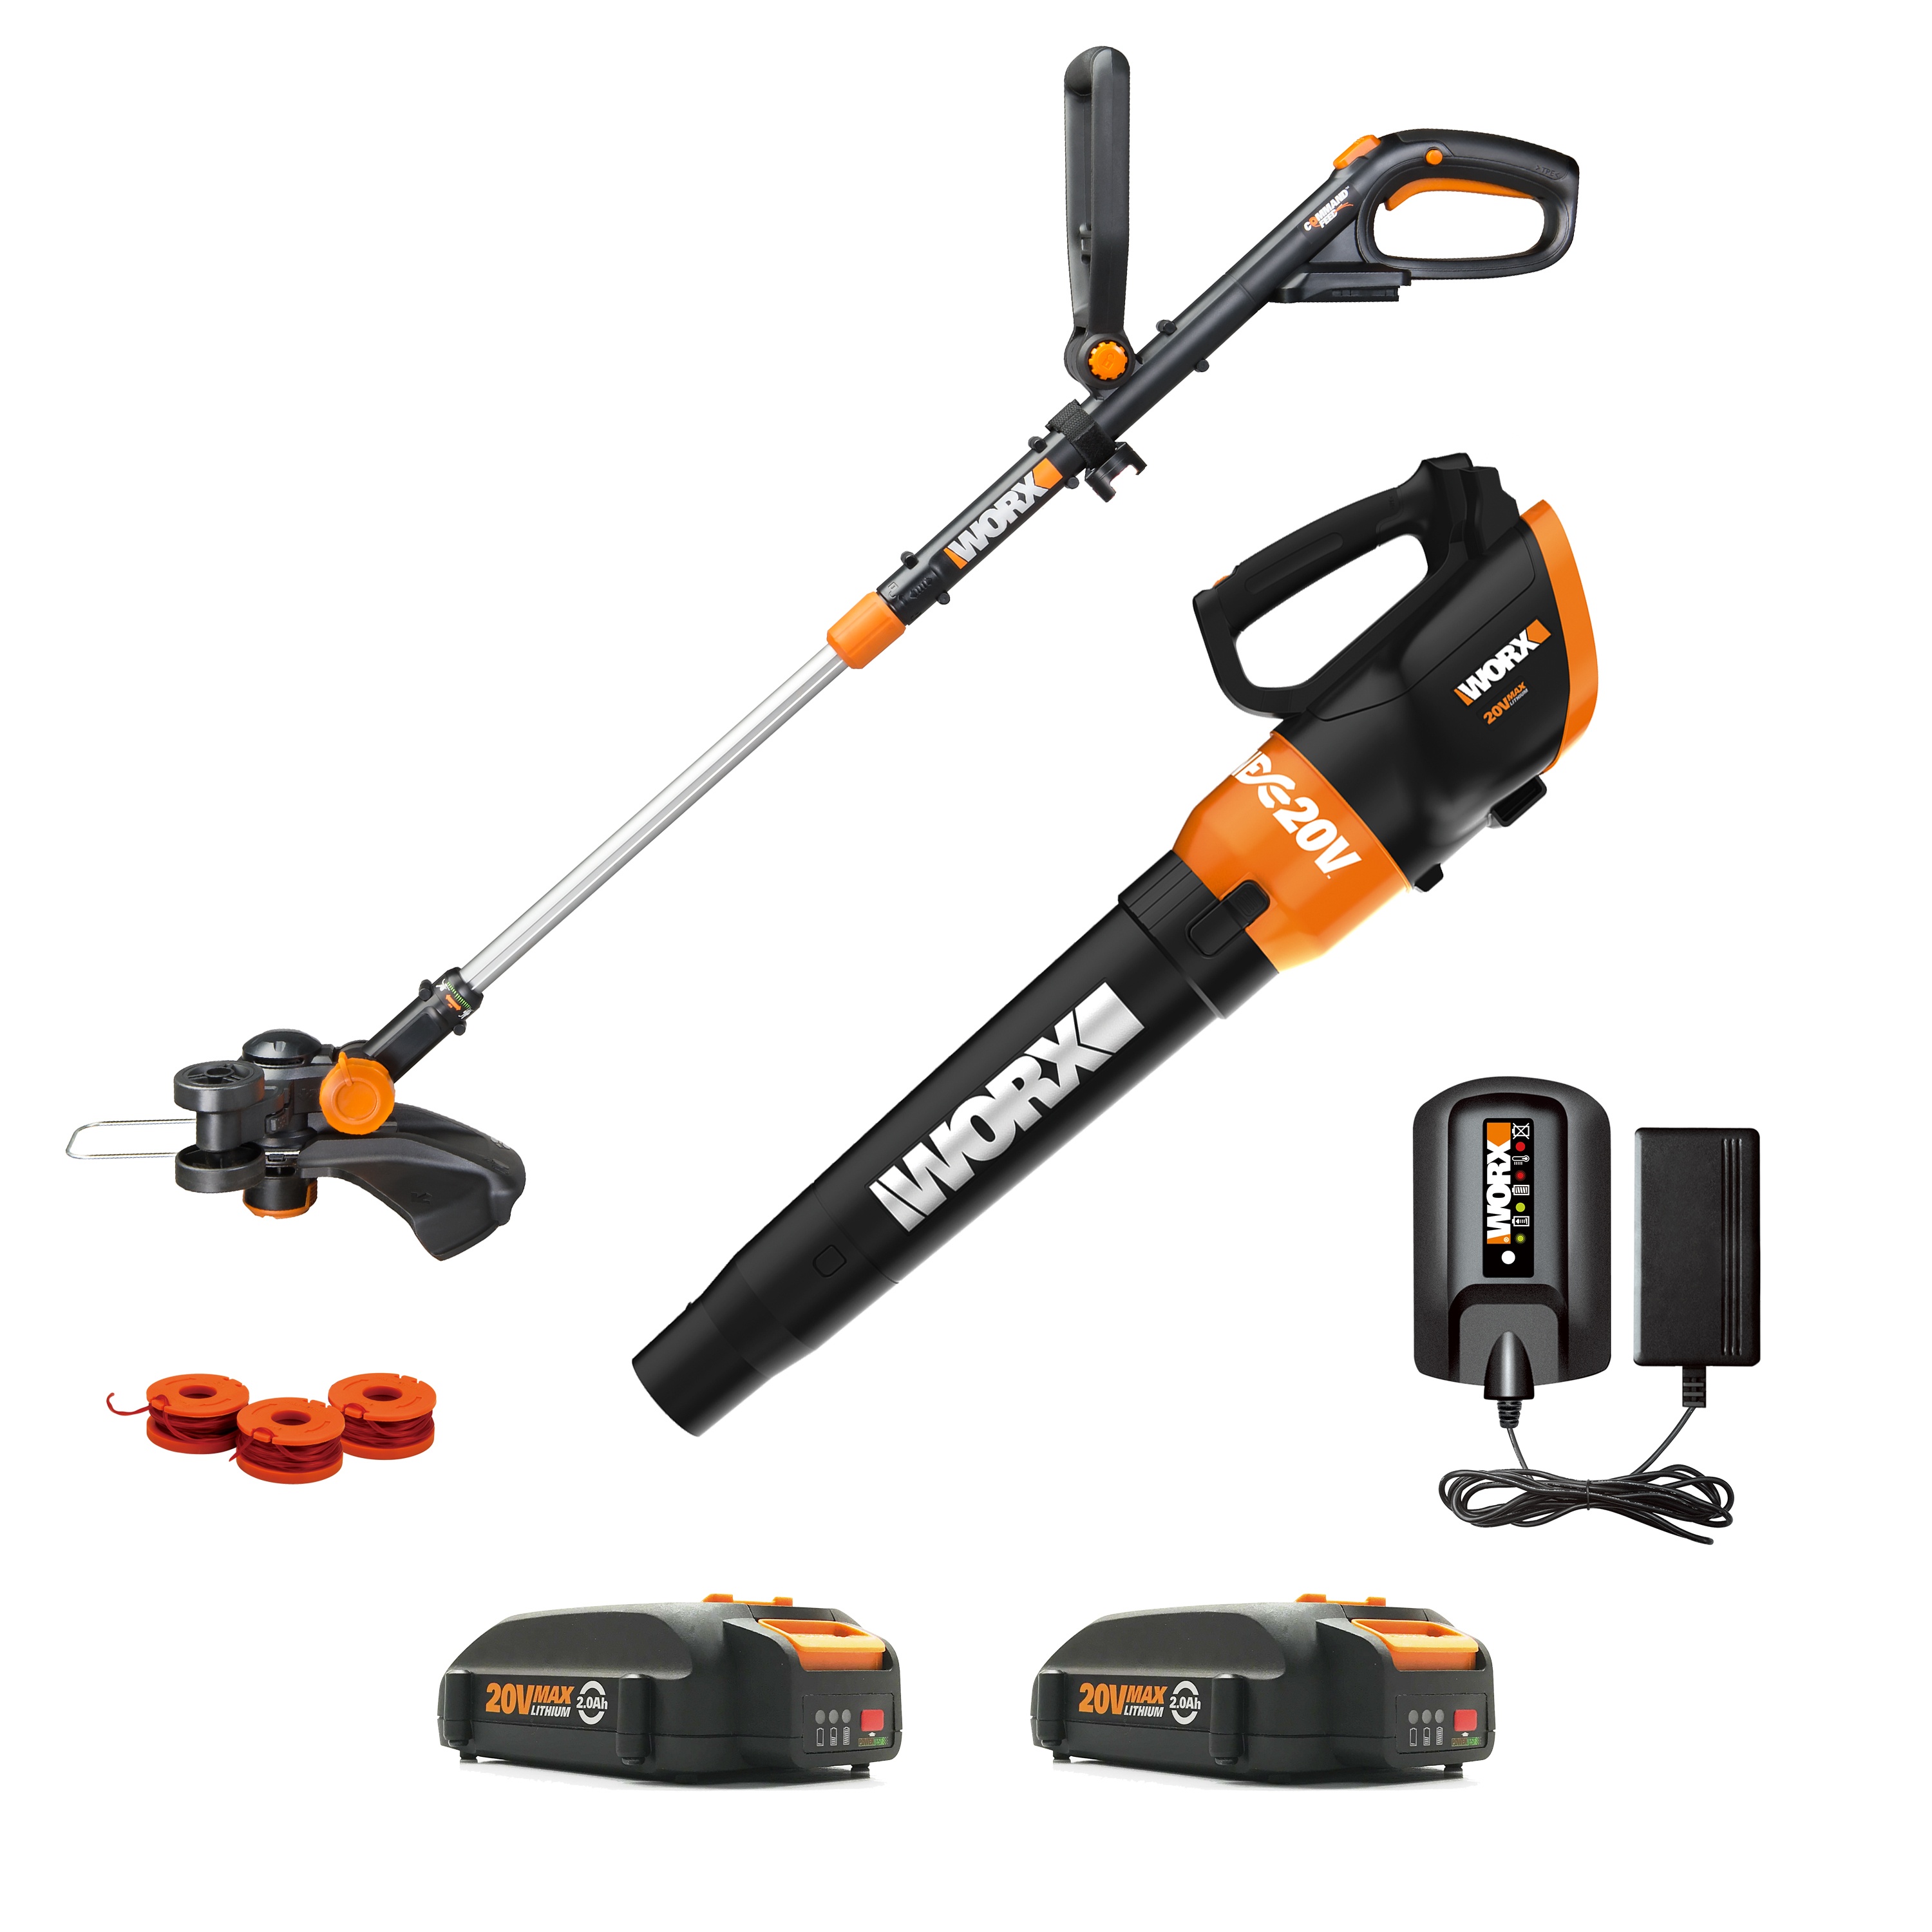 NEW WORX TOOL INNOVATIONS MAKE GREAT DIY VALENTINE’S DAY GIFTS